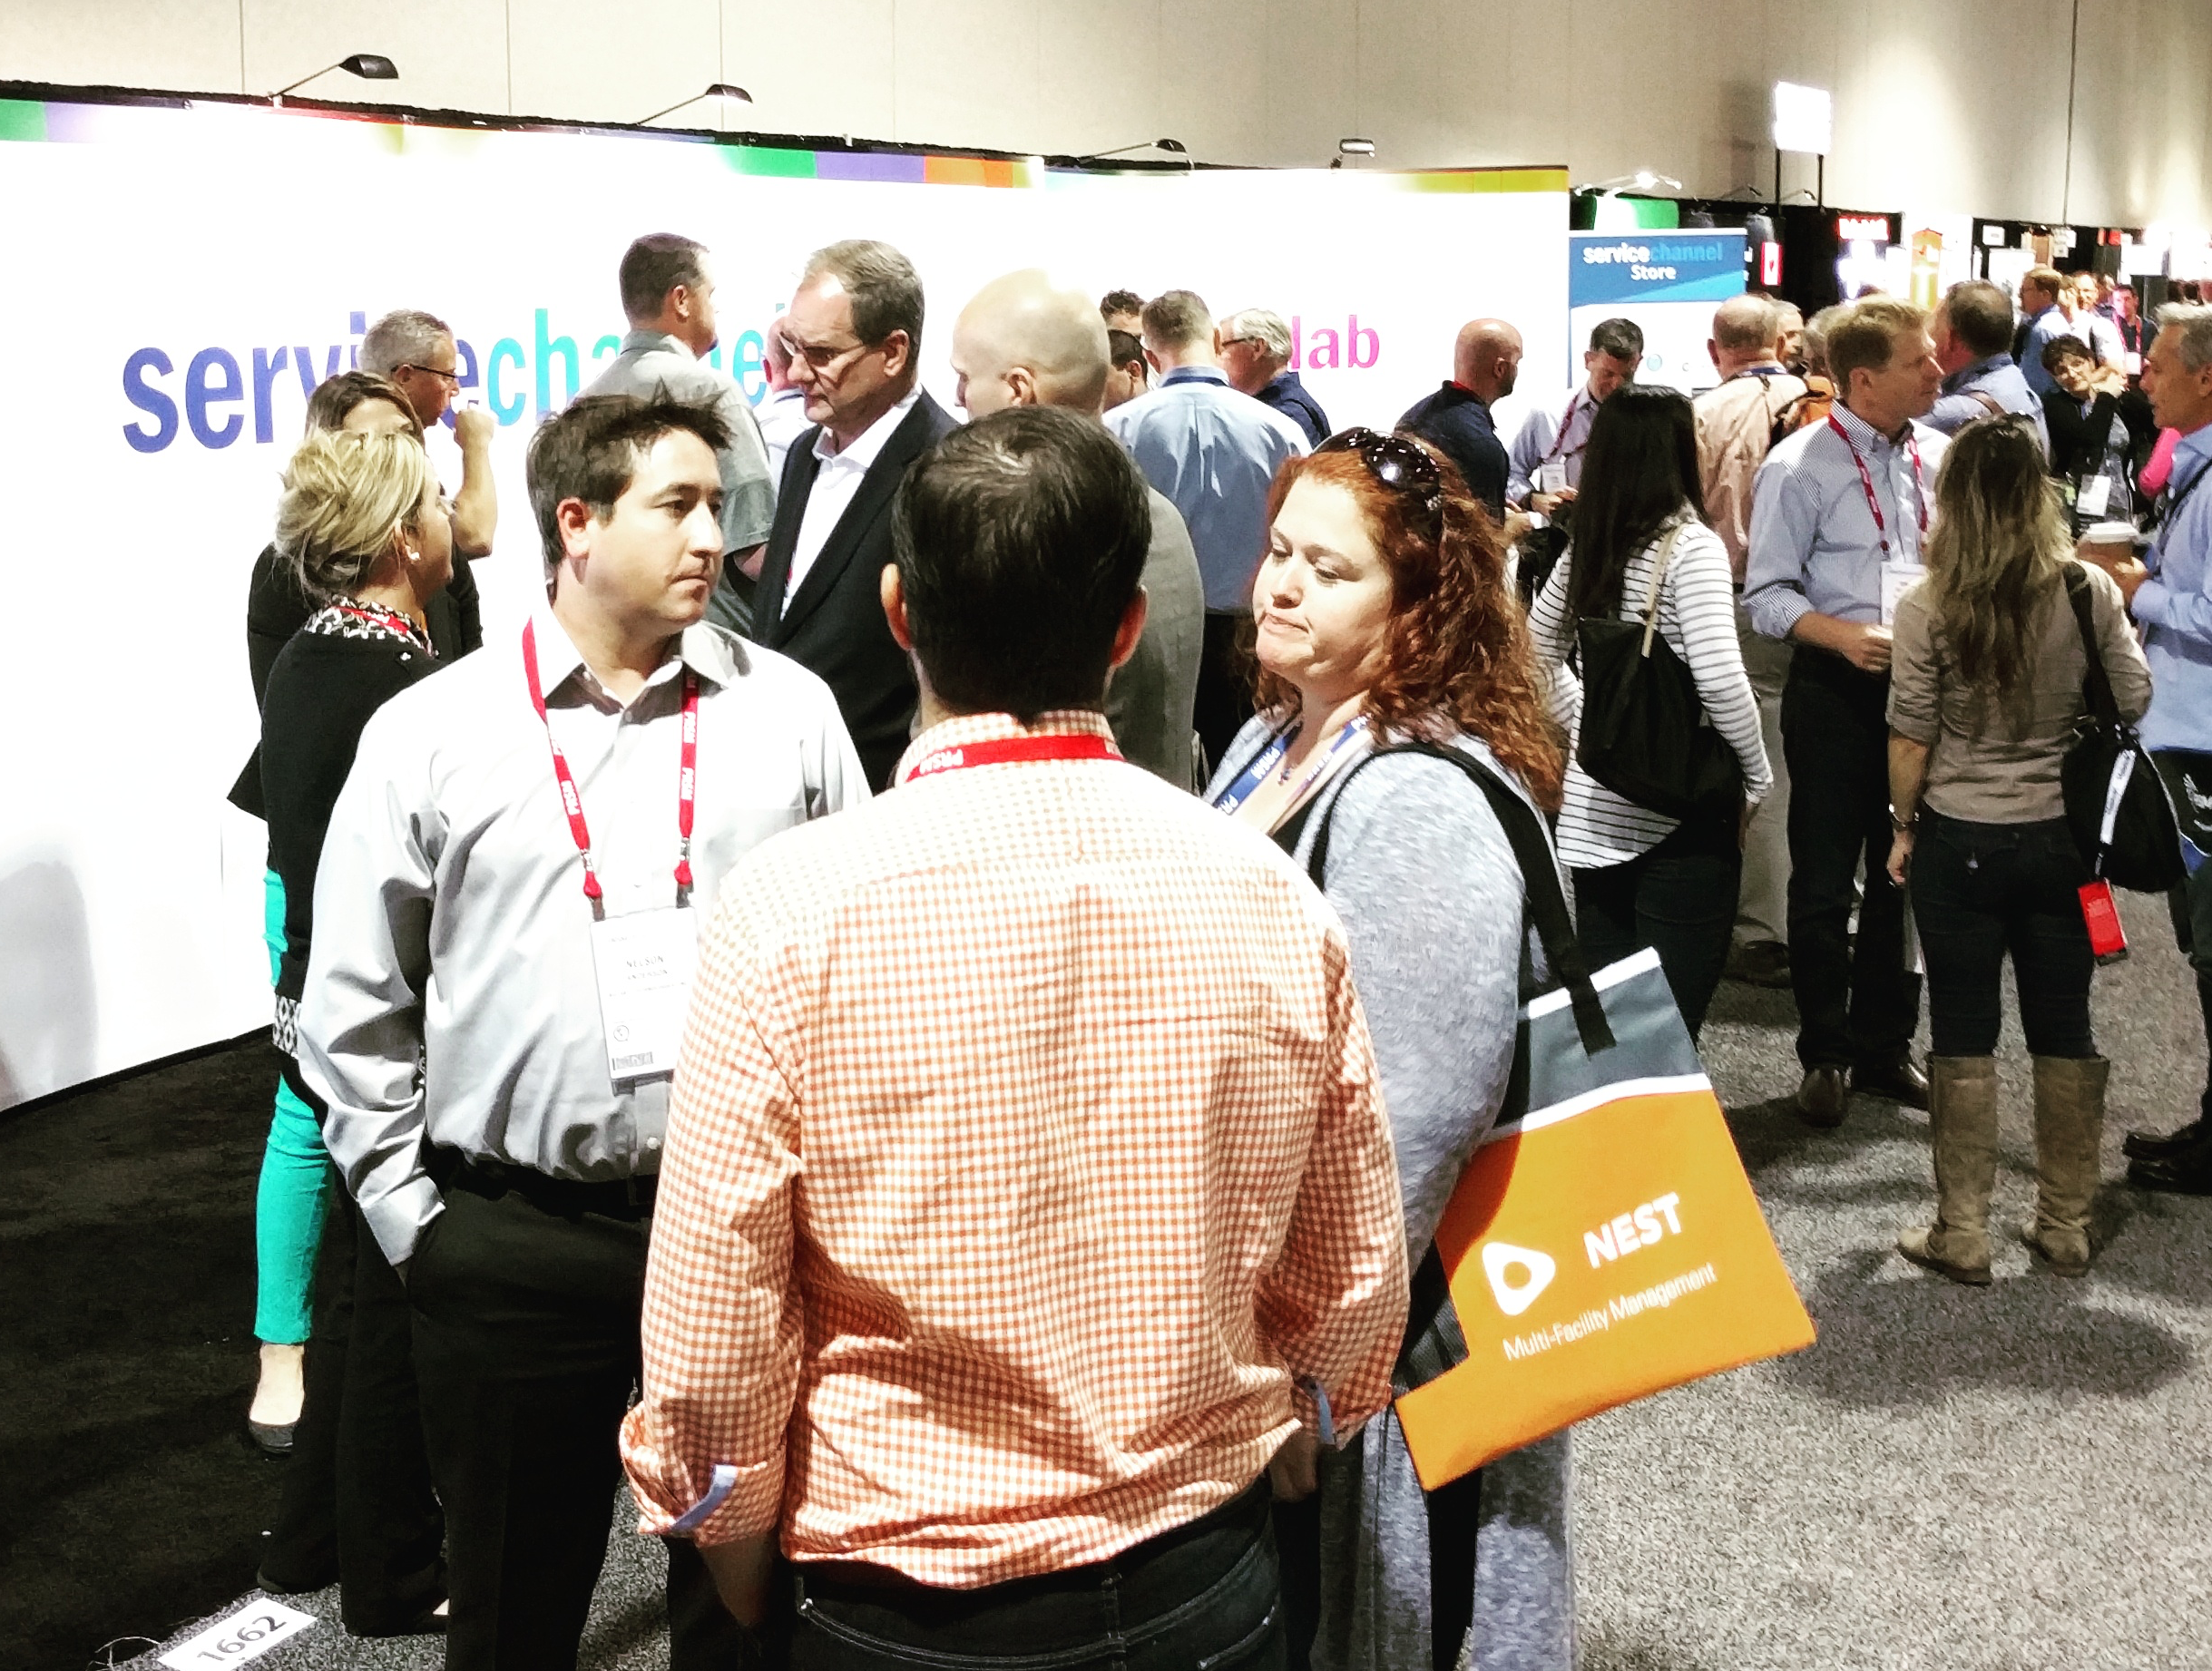 Busy in front of the ServiceChannel Booth at PRSM 2016